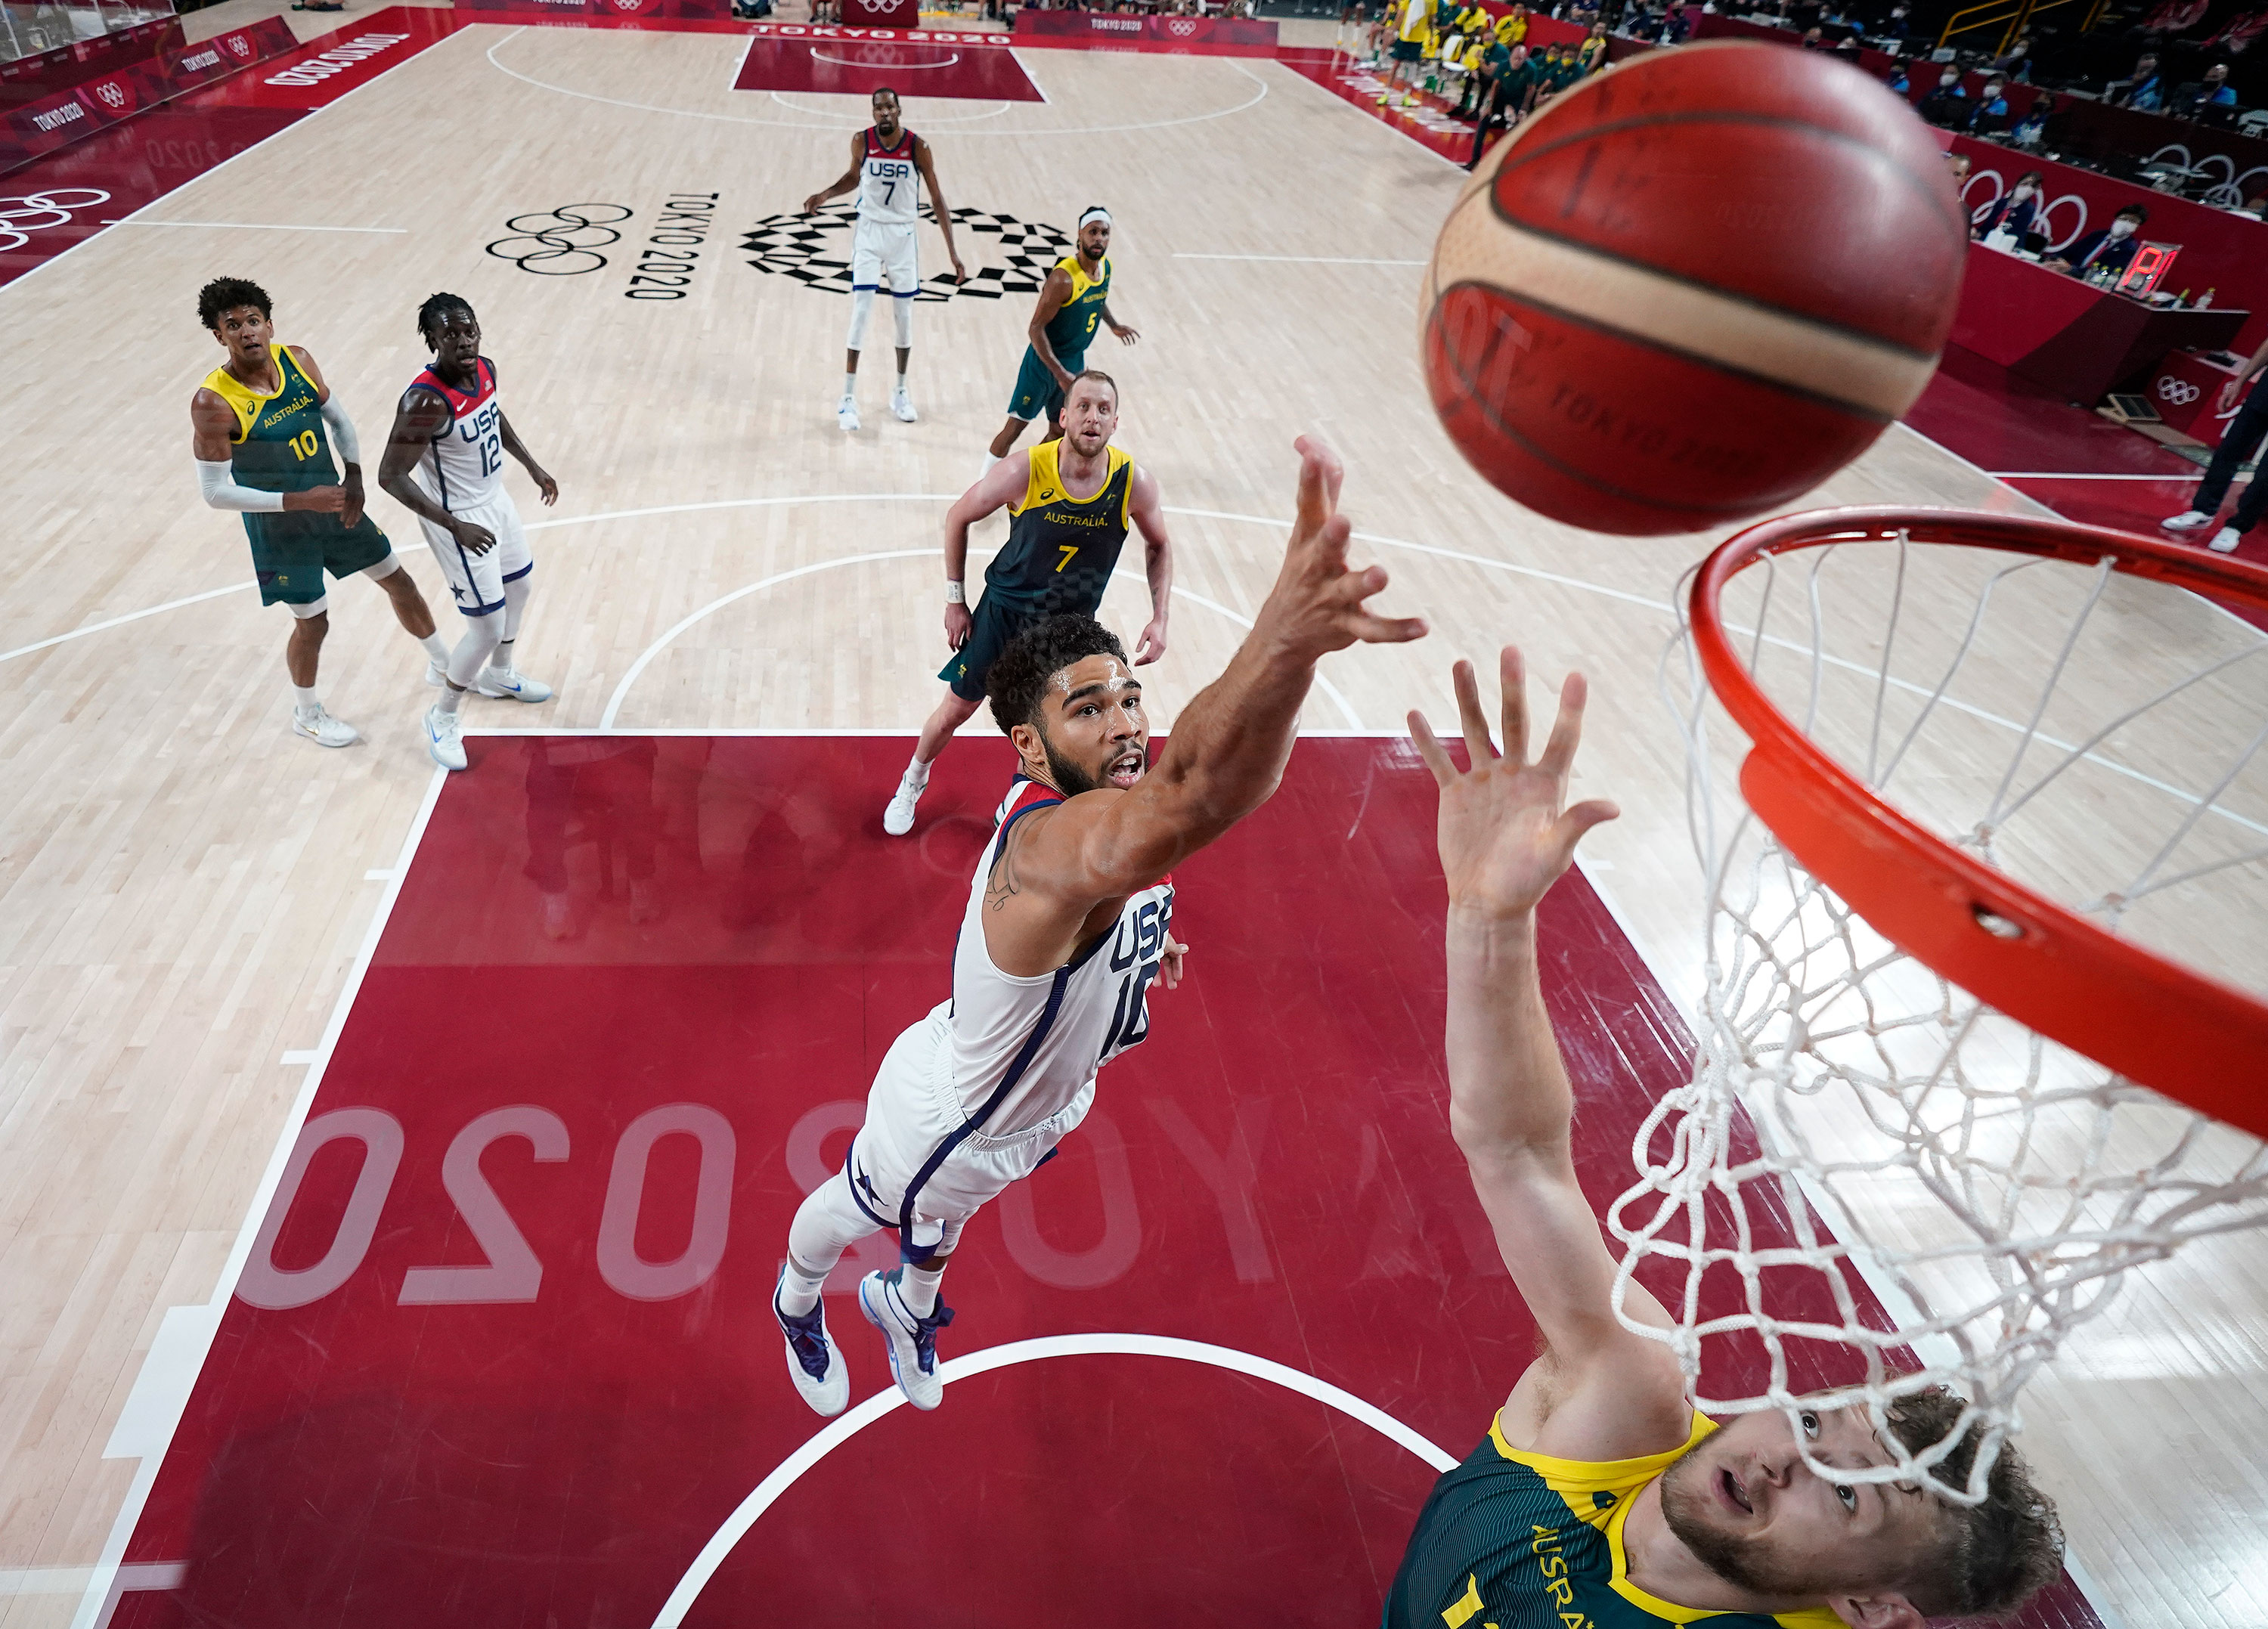 America's Jayson Tatum drives to the basket against Australia's Jock Landale during the first half of their quarterfinal basketball game on Thursday.